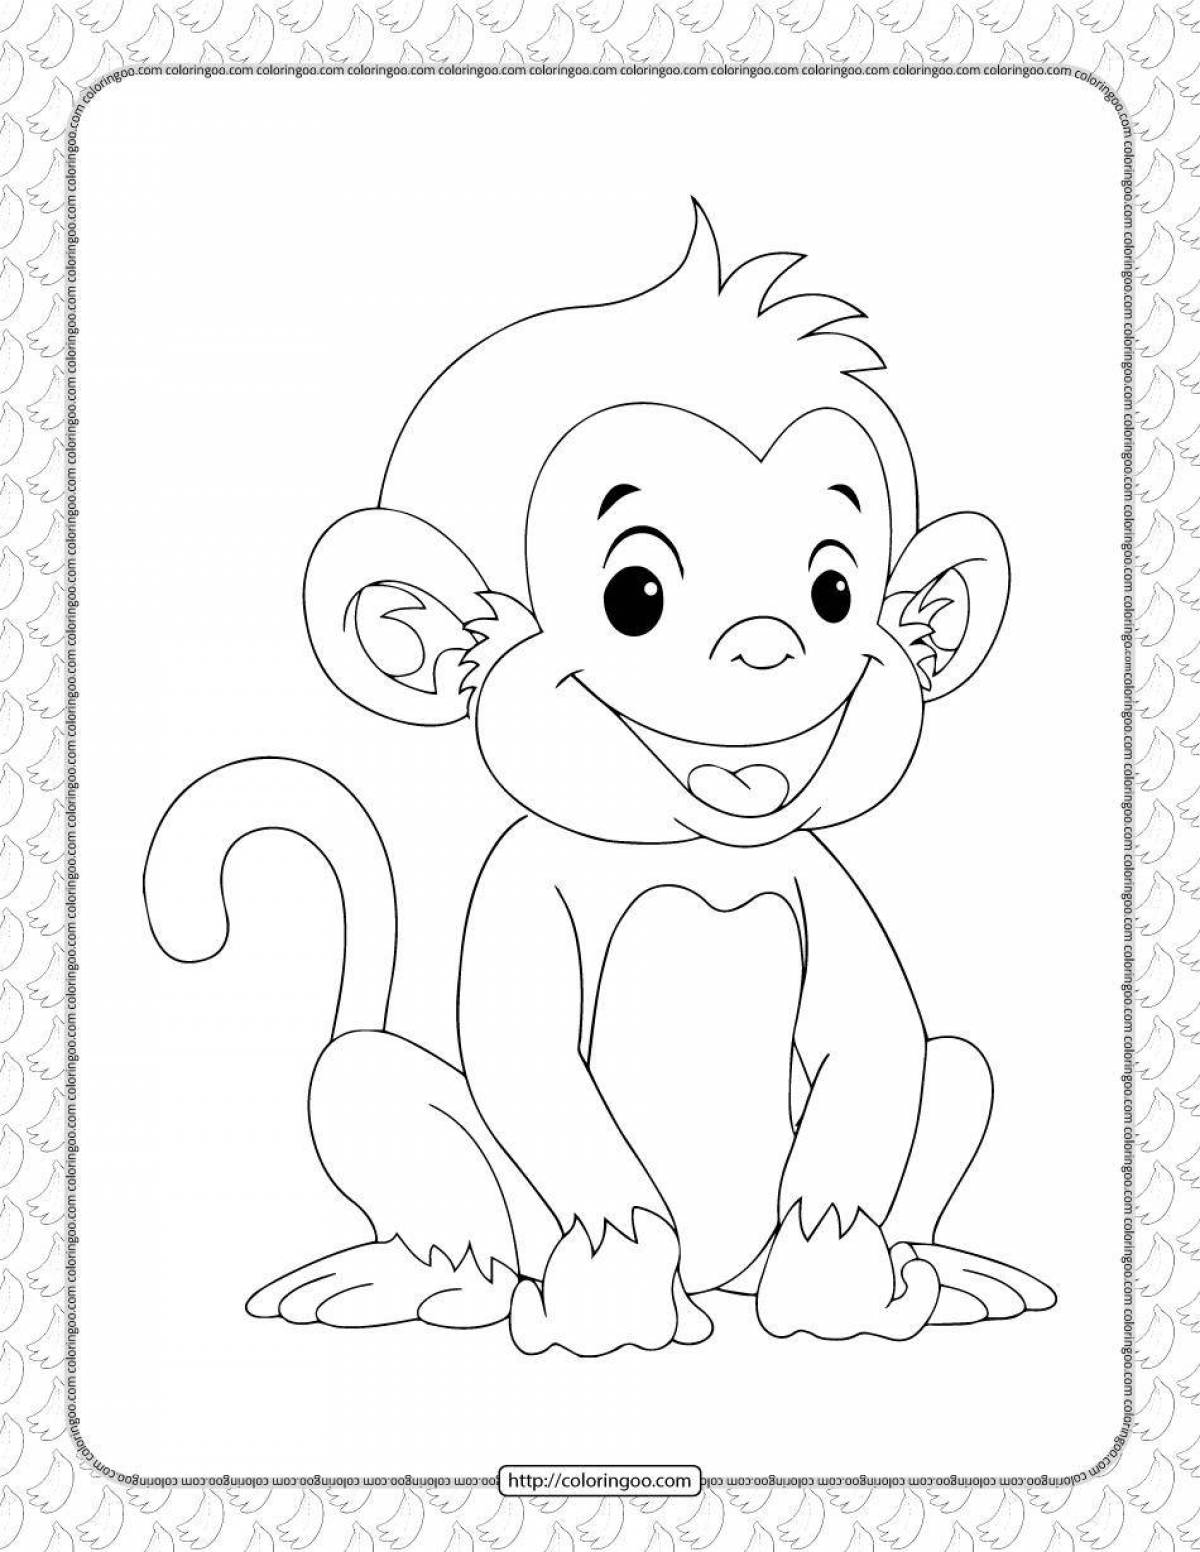 Monkey coloring page